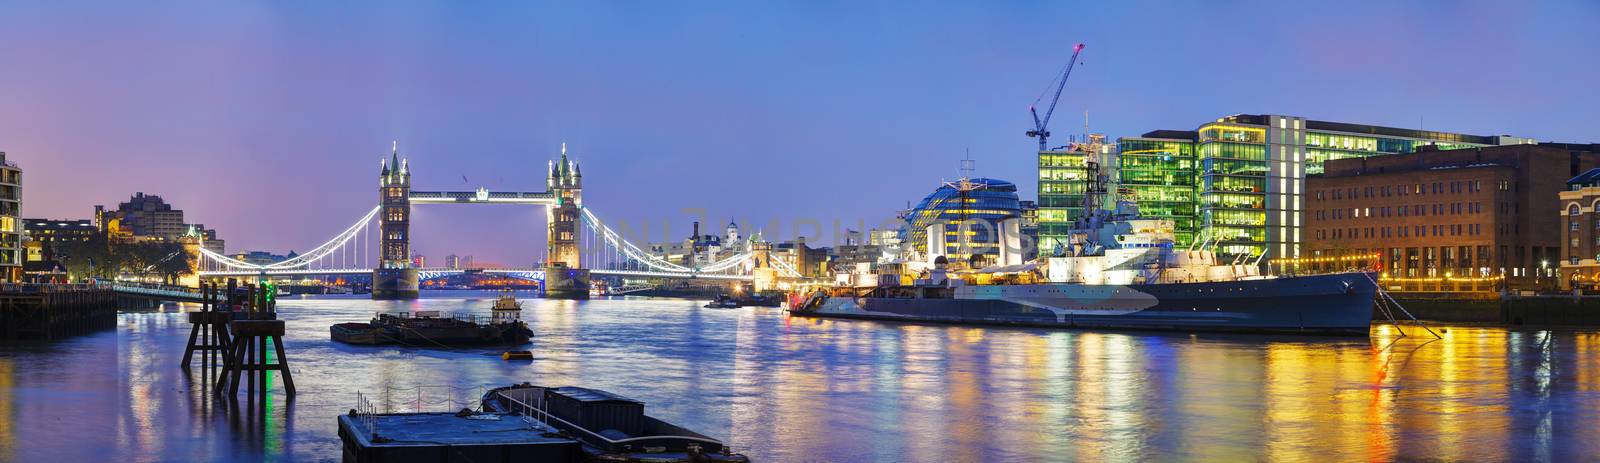 Panoramic overview of Tower bridge in London, Great Britain at night